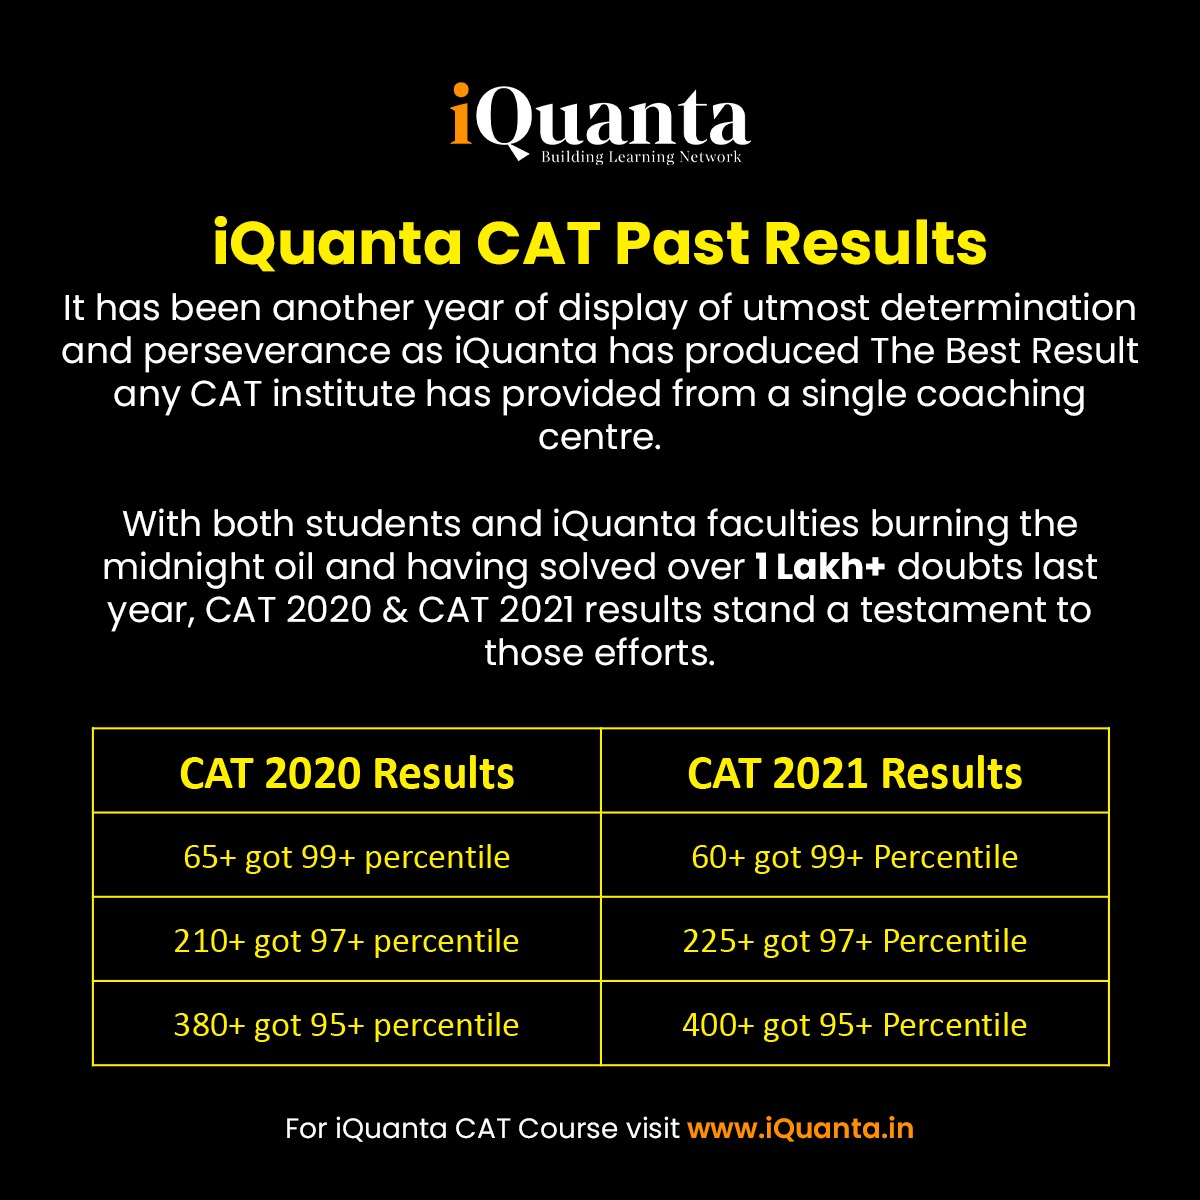 iQuanta CAT results